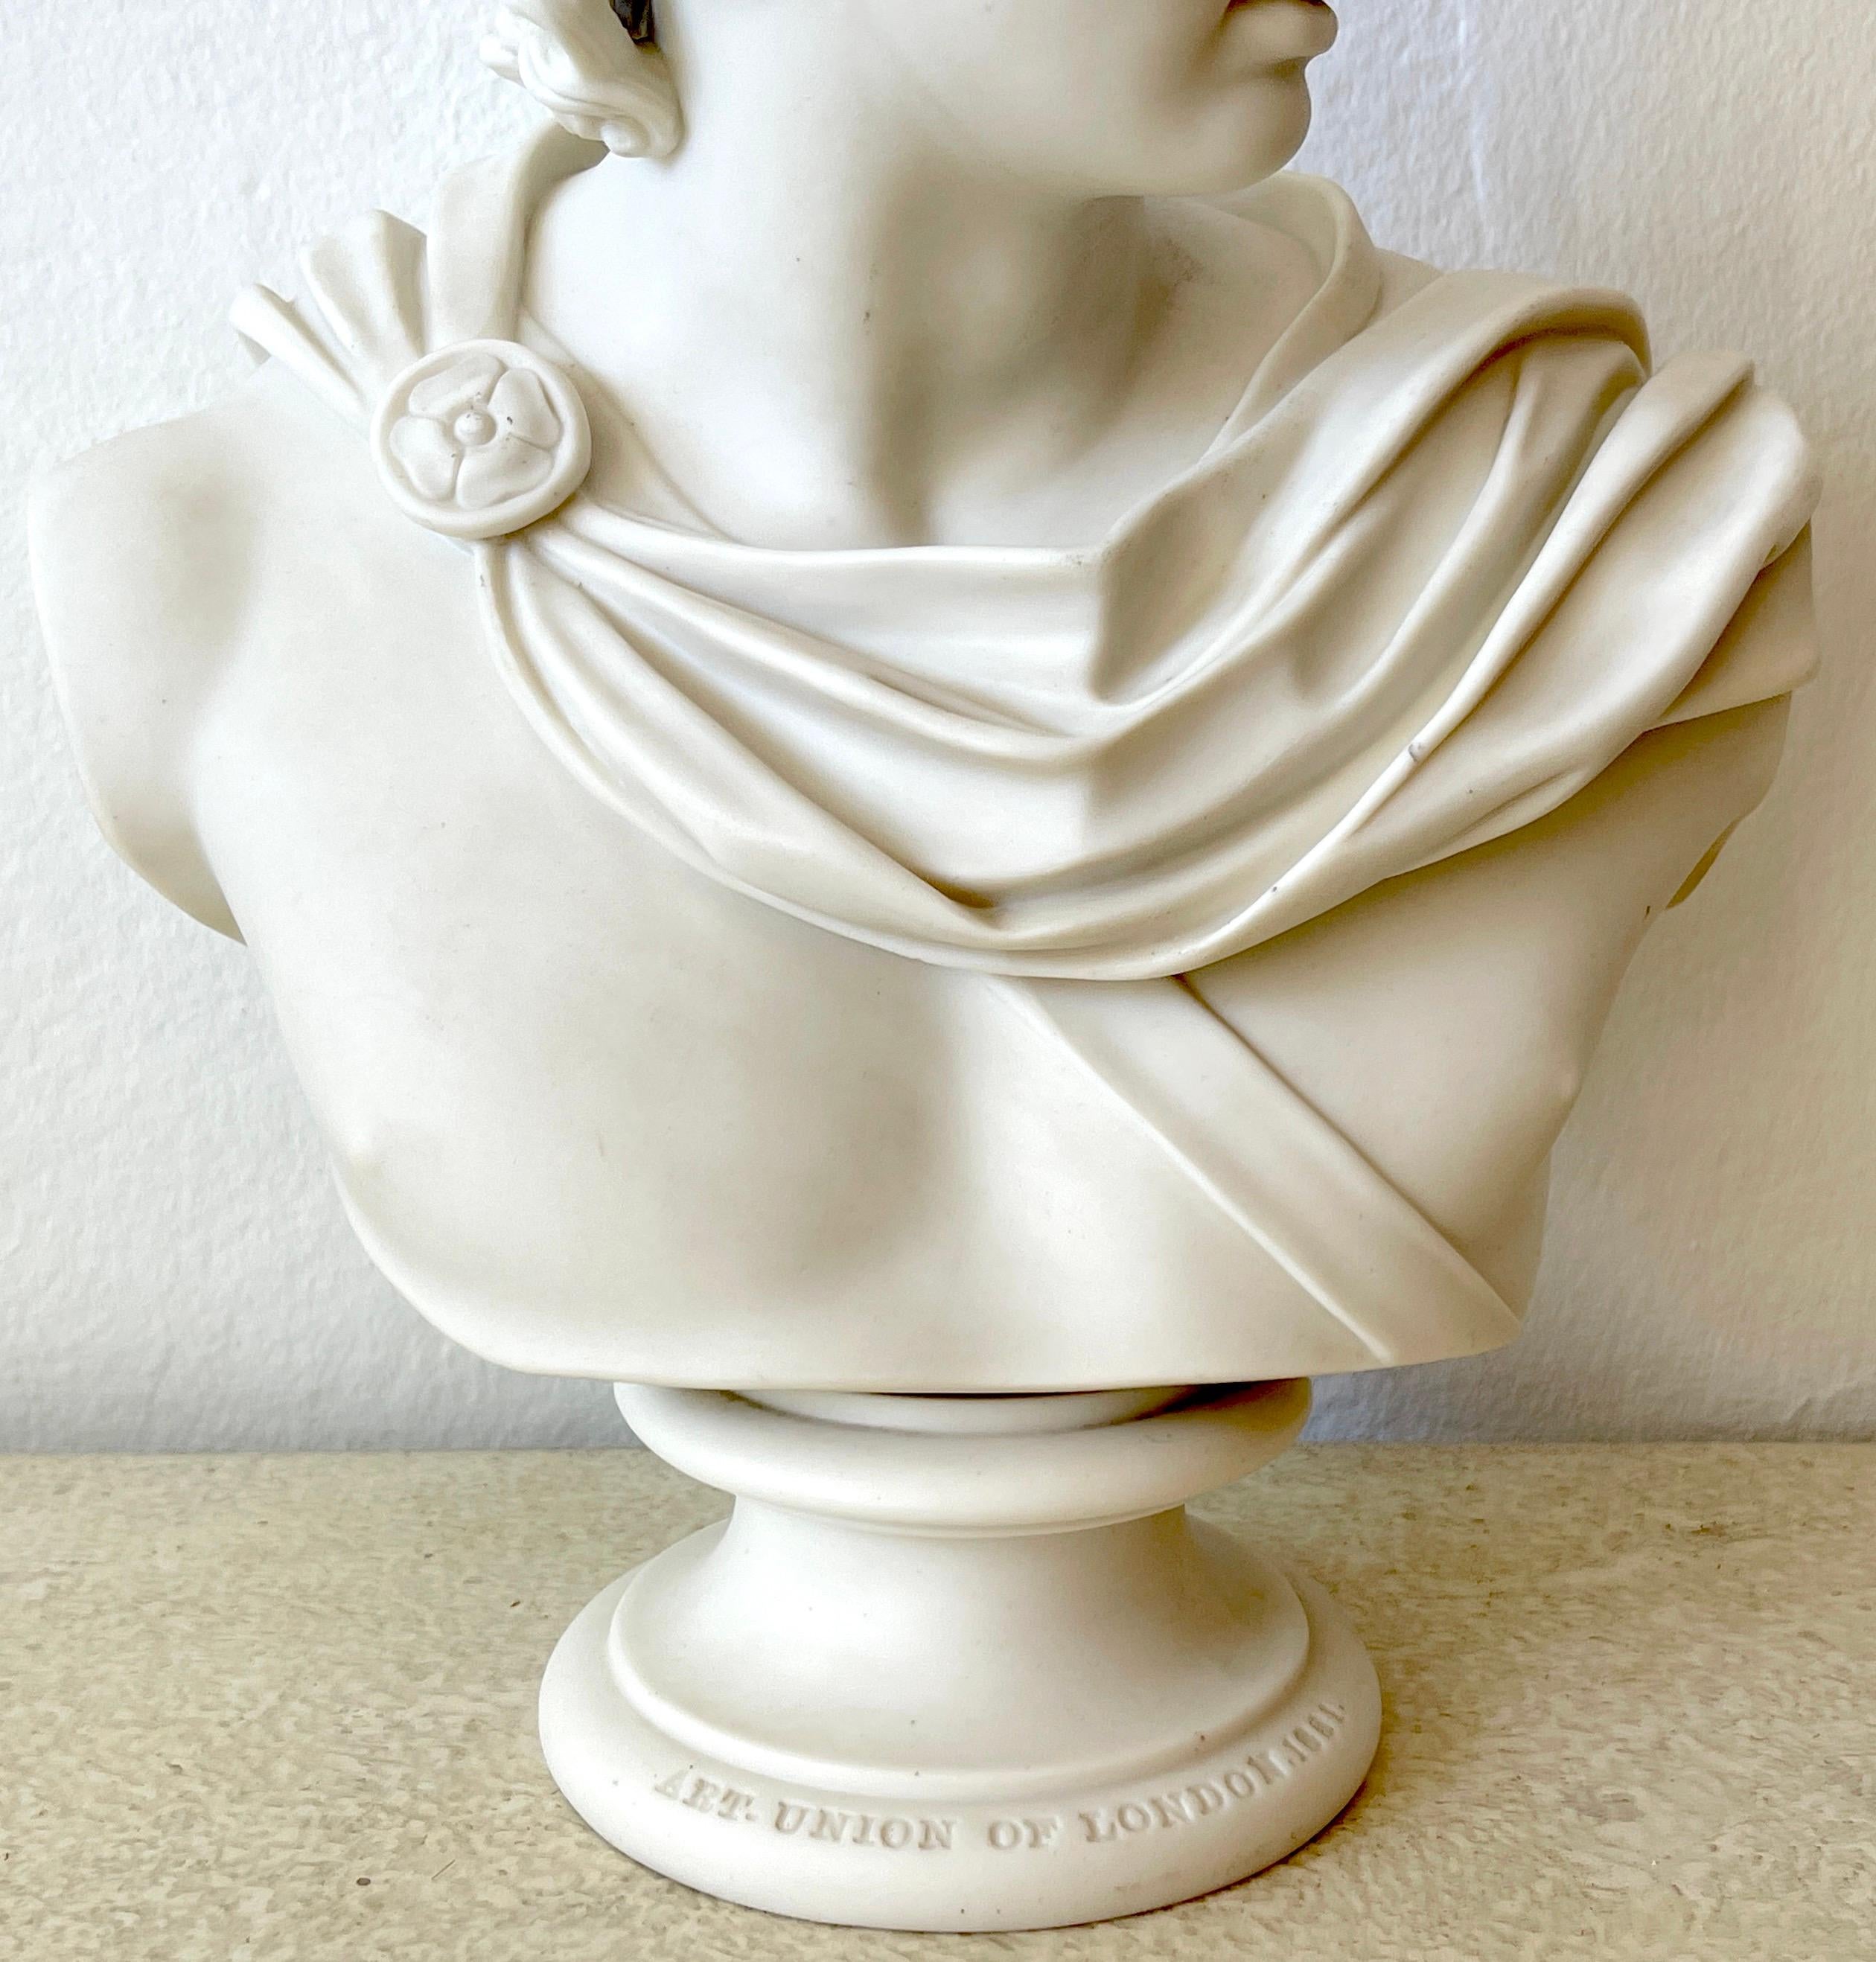 English Art Union of London Parian Bust of Apollo Belvedere, by C. Delpech, 1861